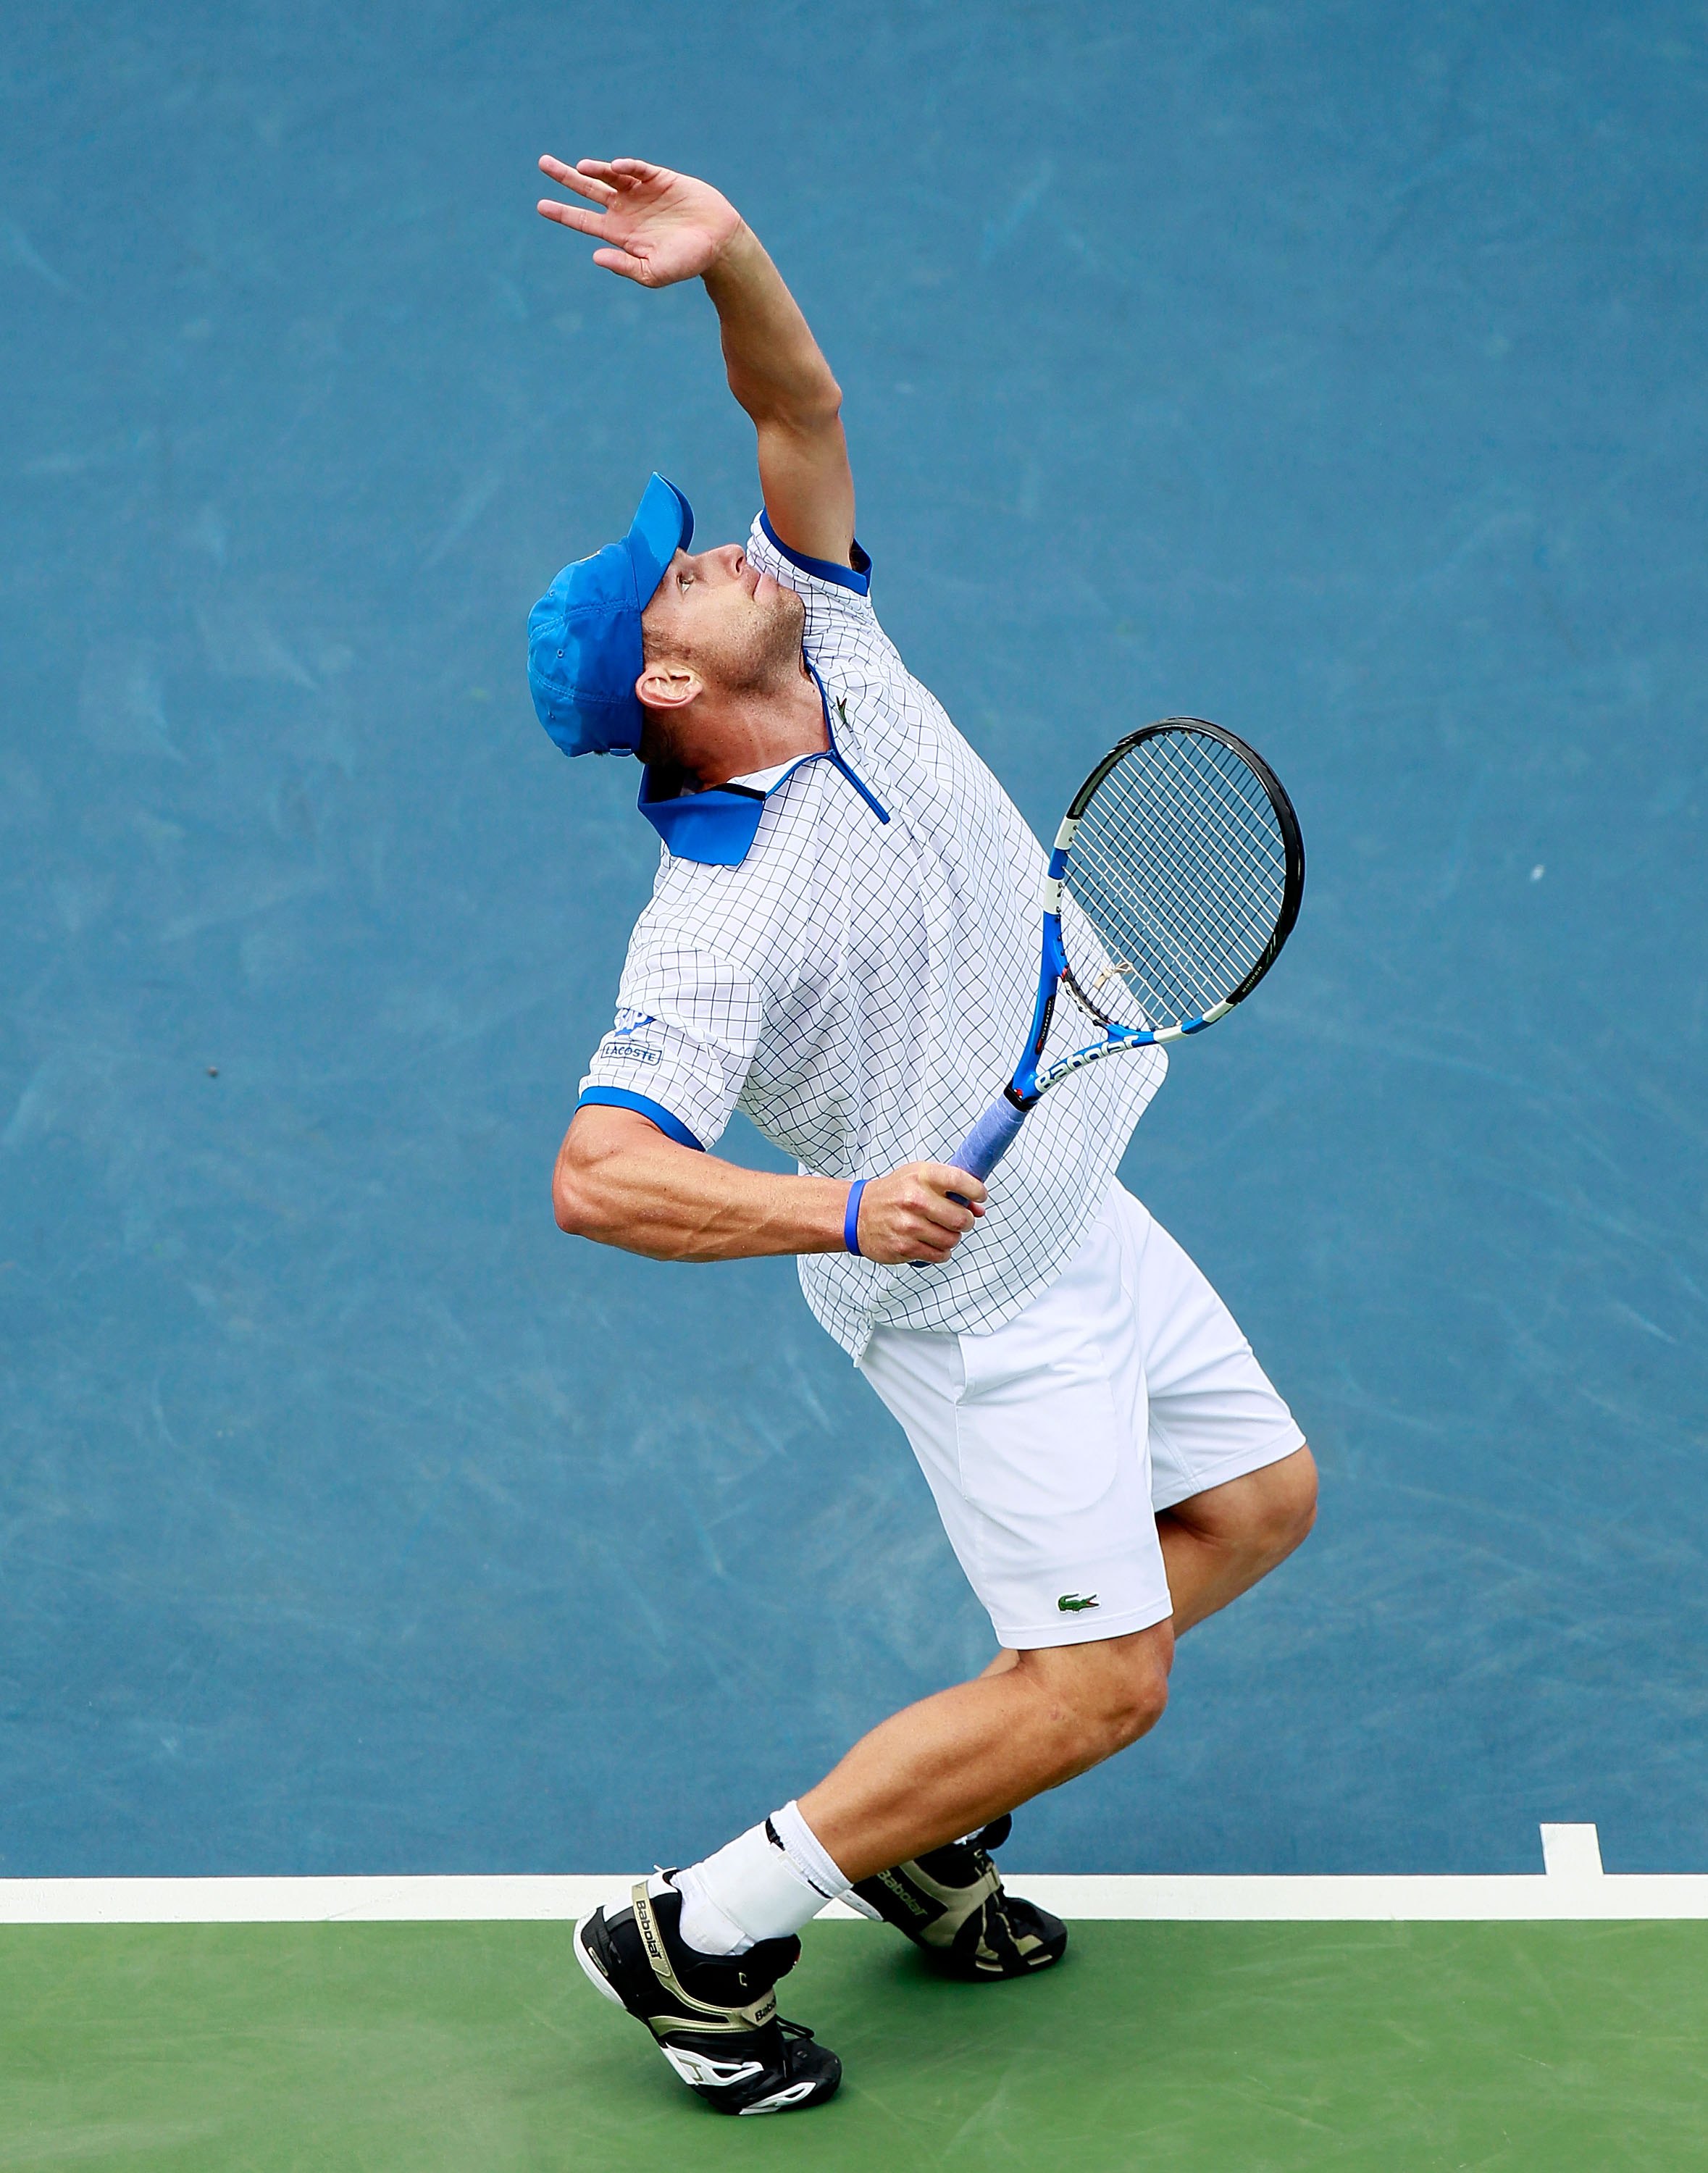 CINCINNATI - AUGUST 21:  Andy Roddick during the semifinals on Day 6 of the Western & Southern Financial Group Masters at the Lindner Family Tennis Center on August 21, 2010 in Cincinnati, Ohio.  (Photo by Kevin C. Cox/Getty Images)